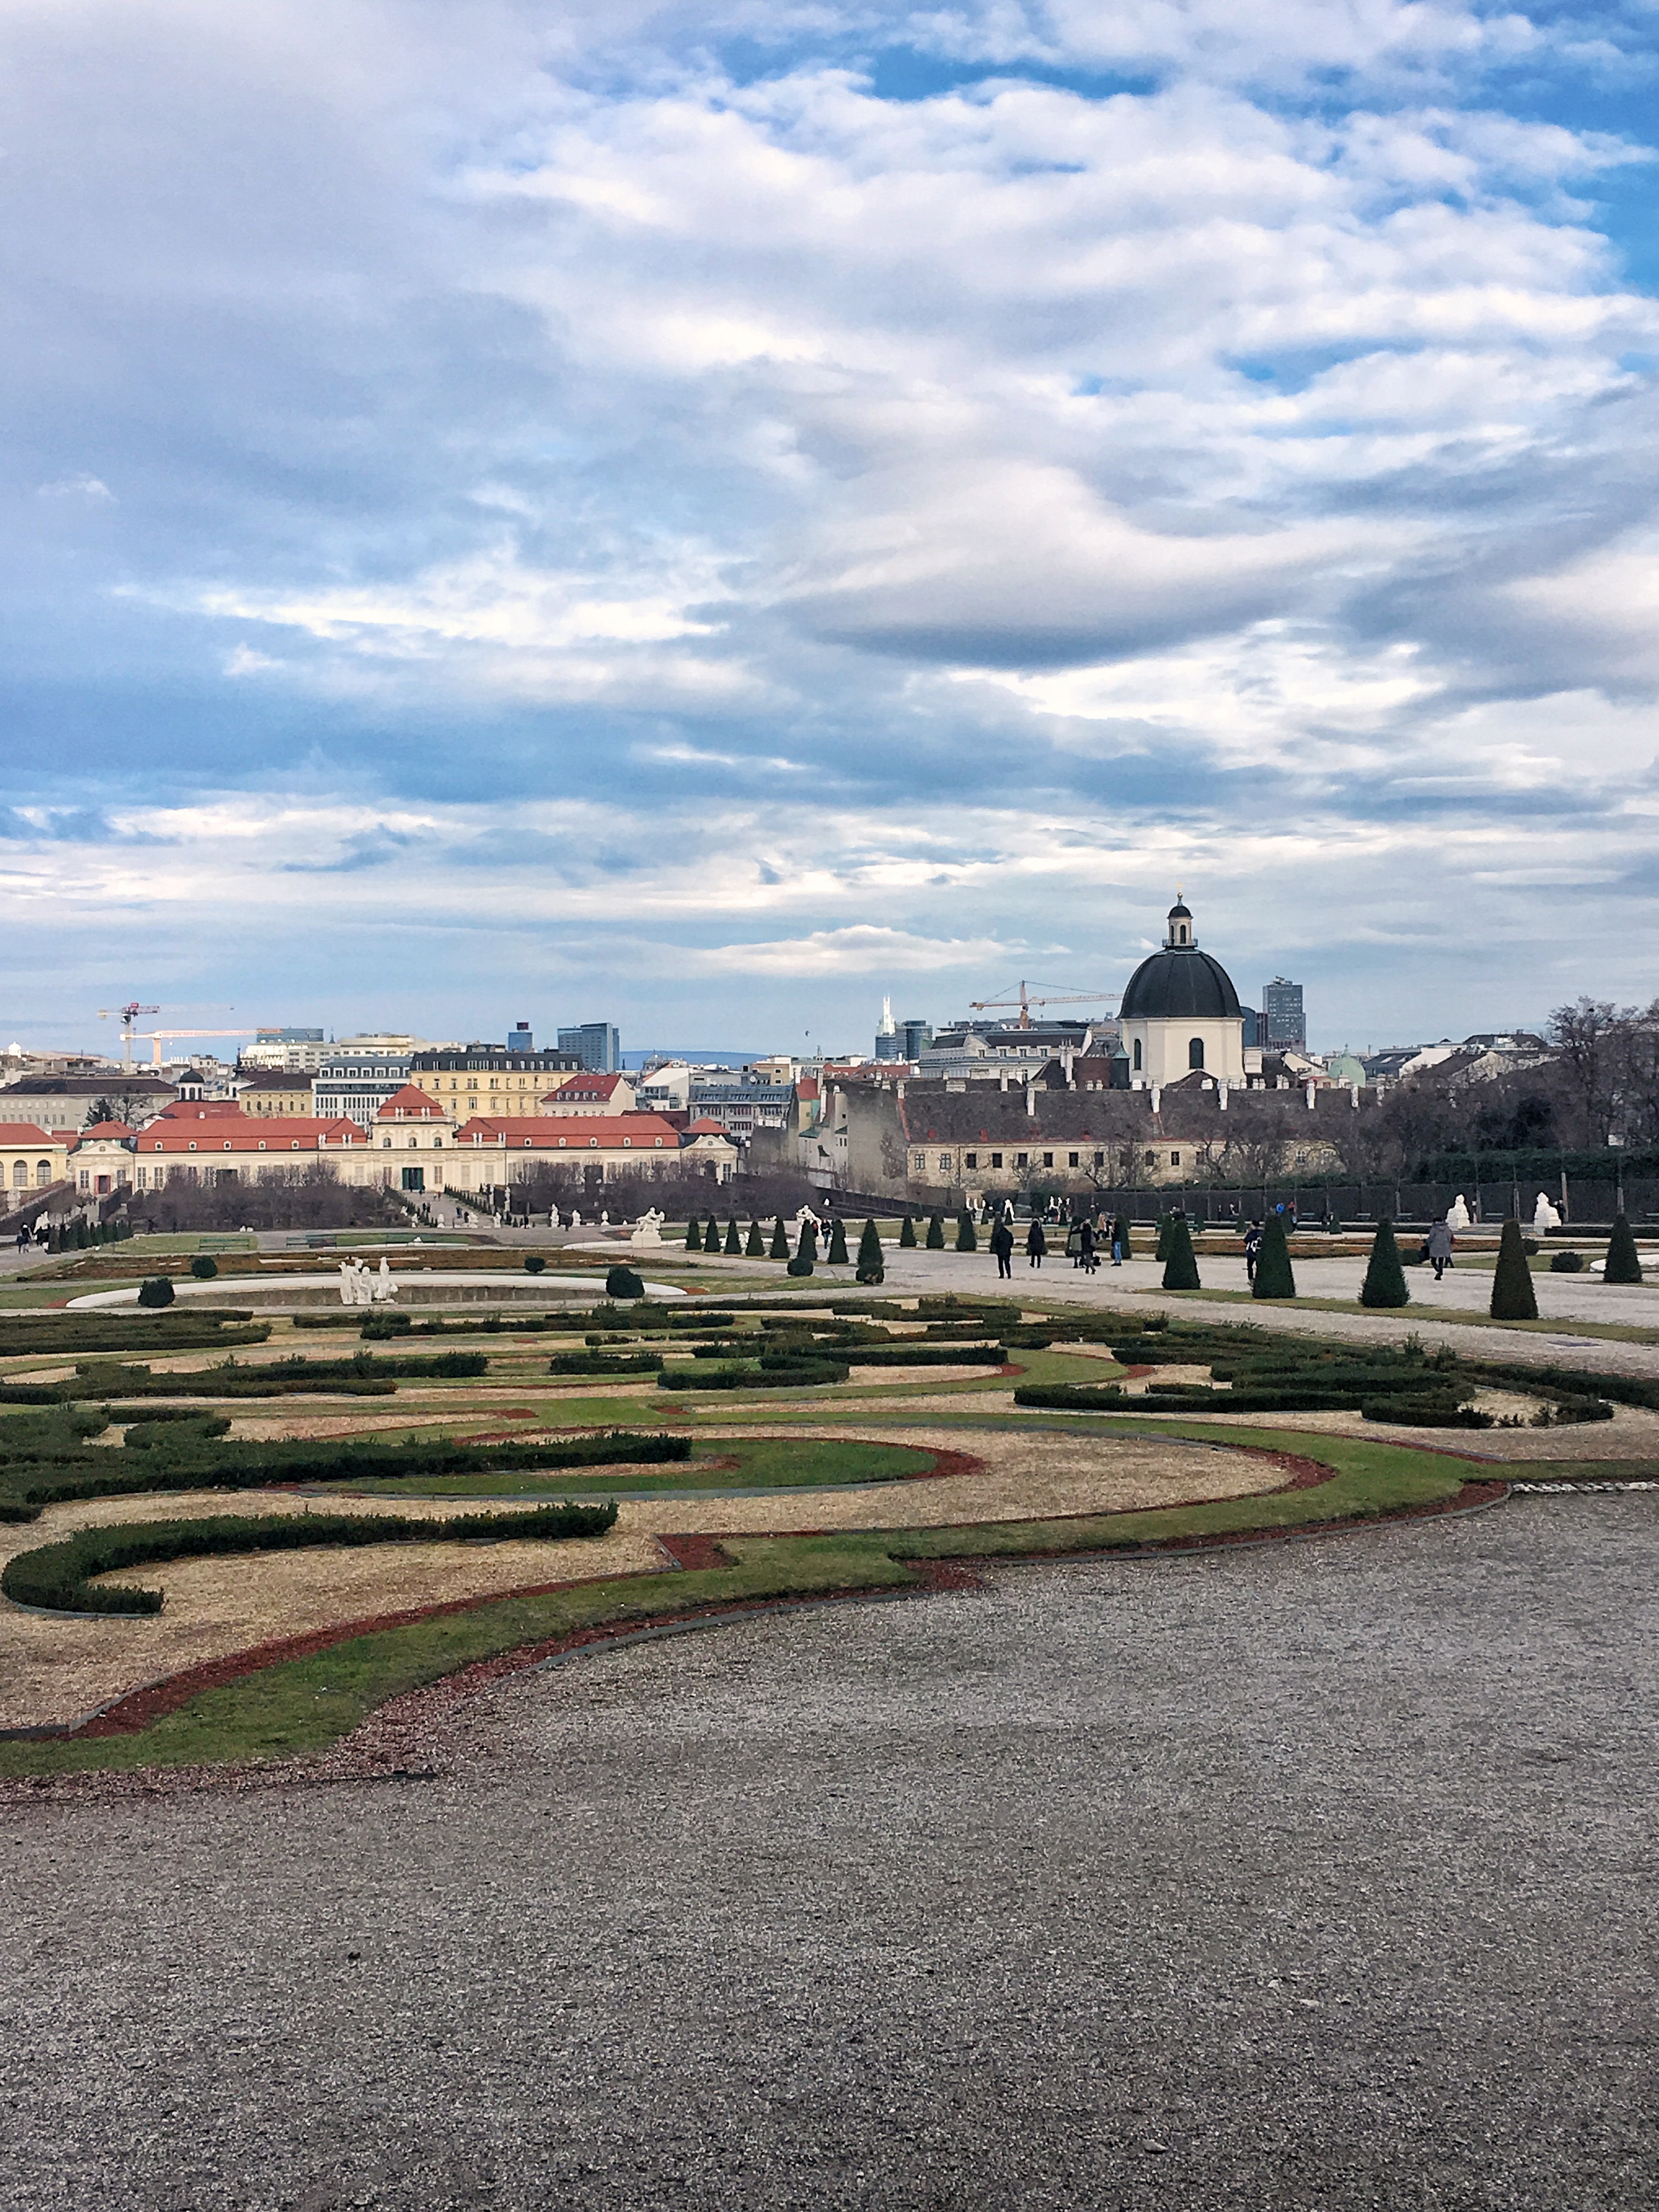 Grounds at Belvedere Palace